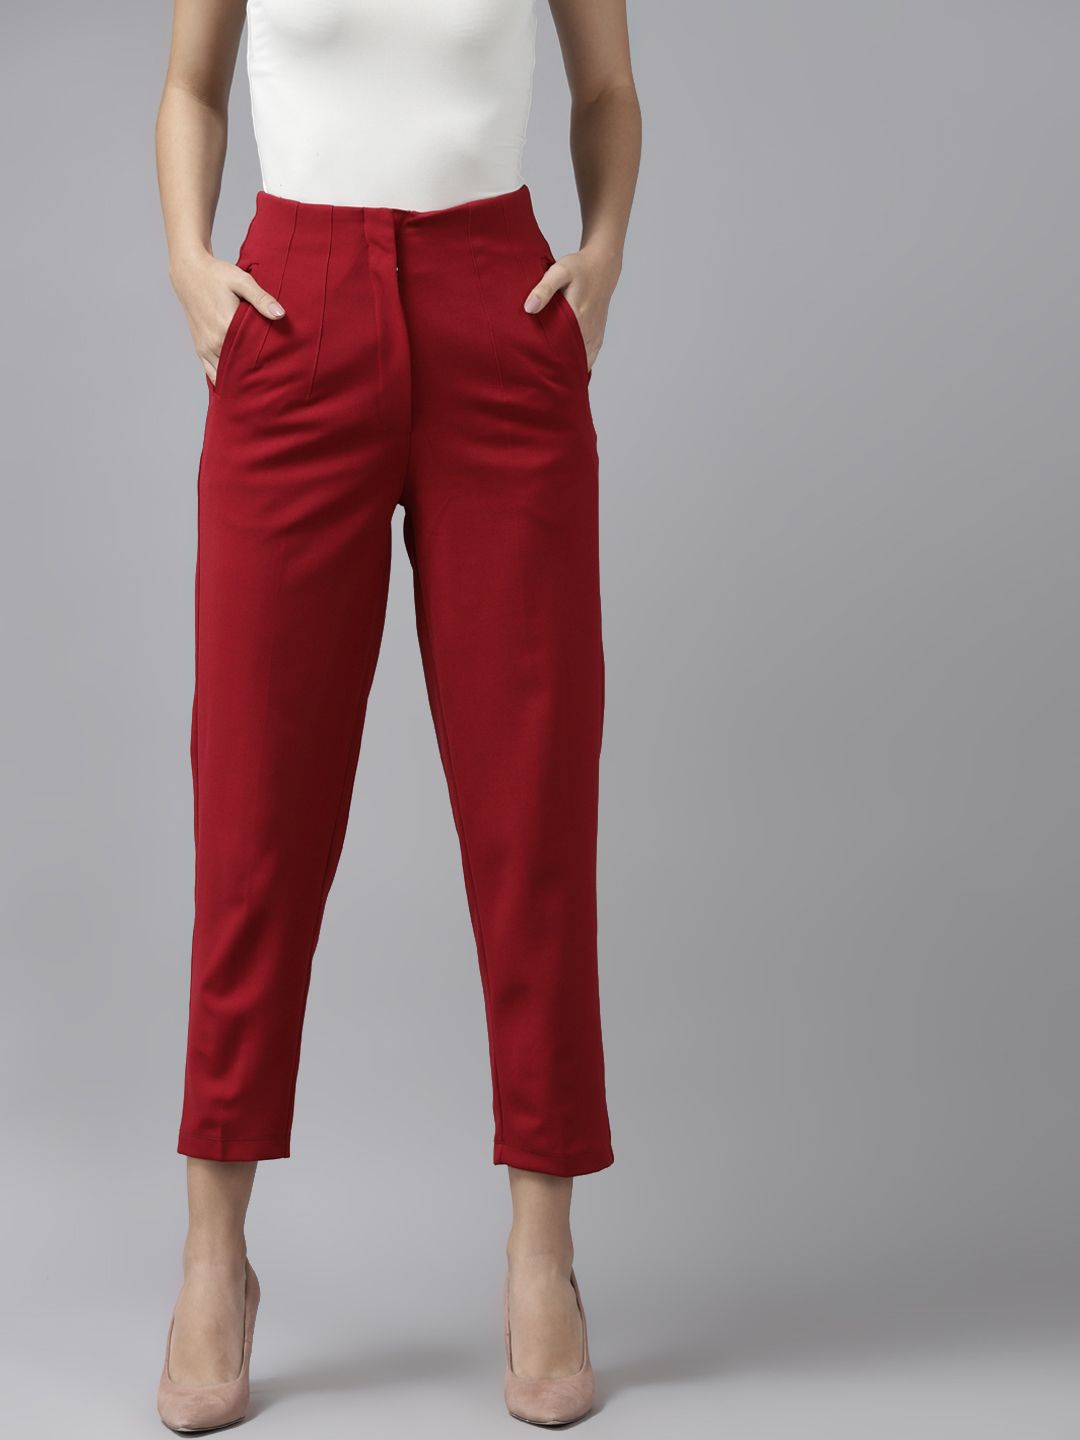 KASSUALLY Women Maroon Solid Peg Trousers Price in India